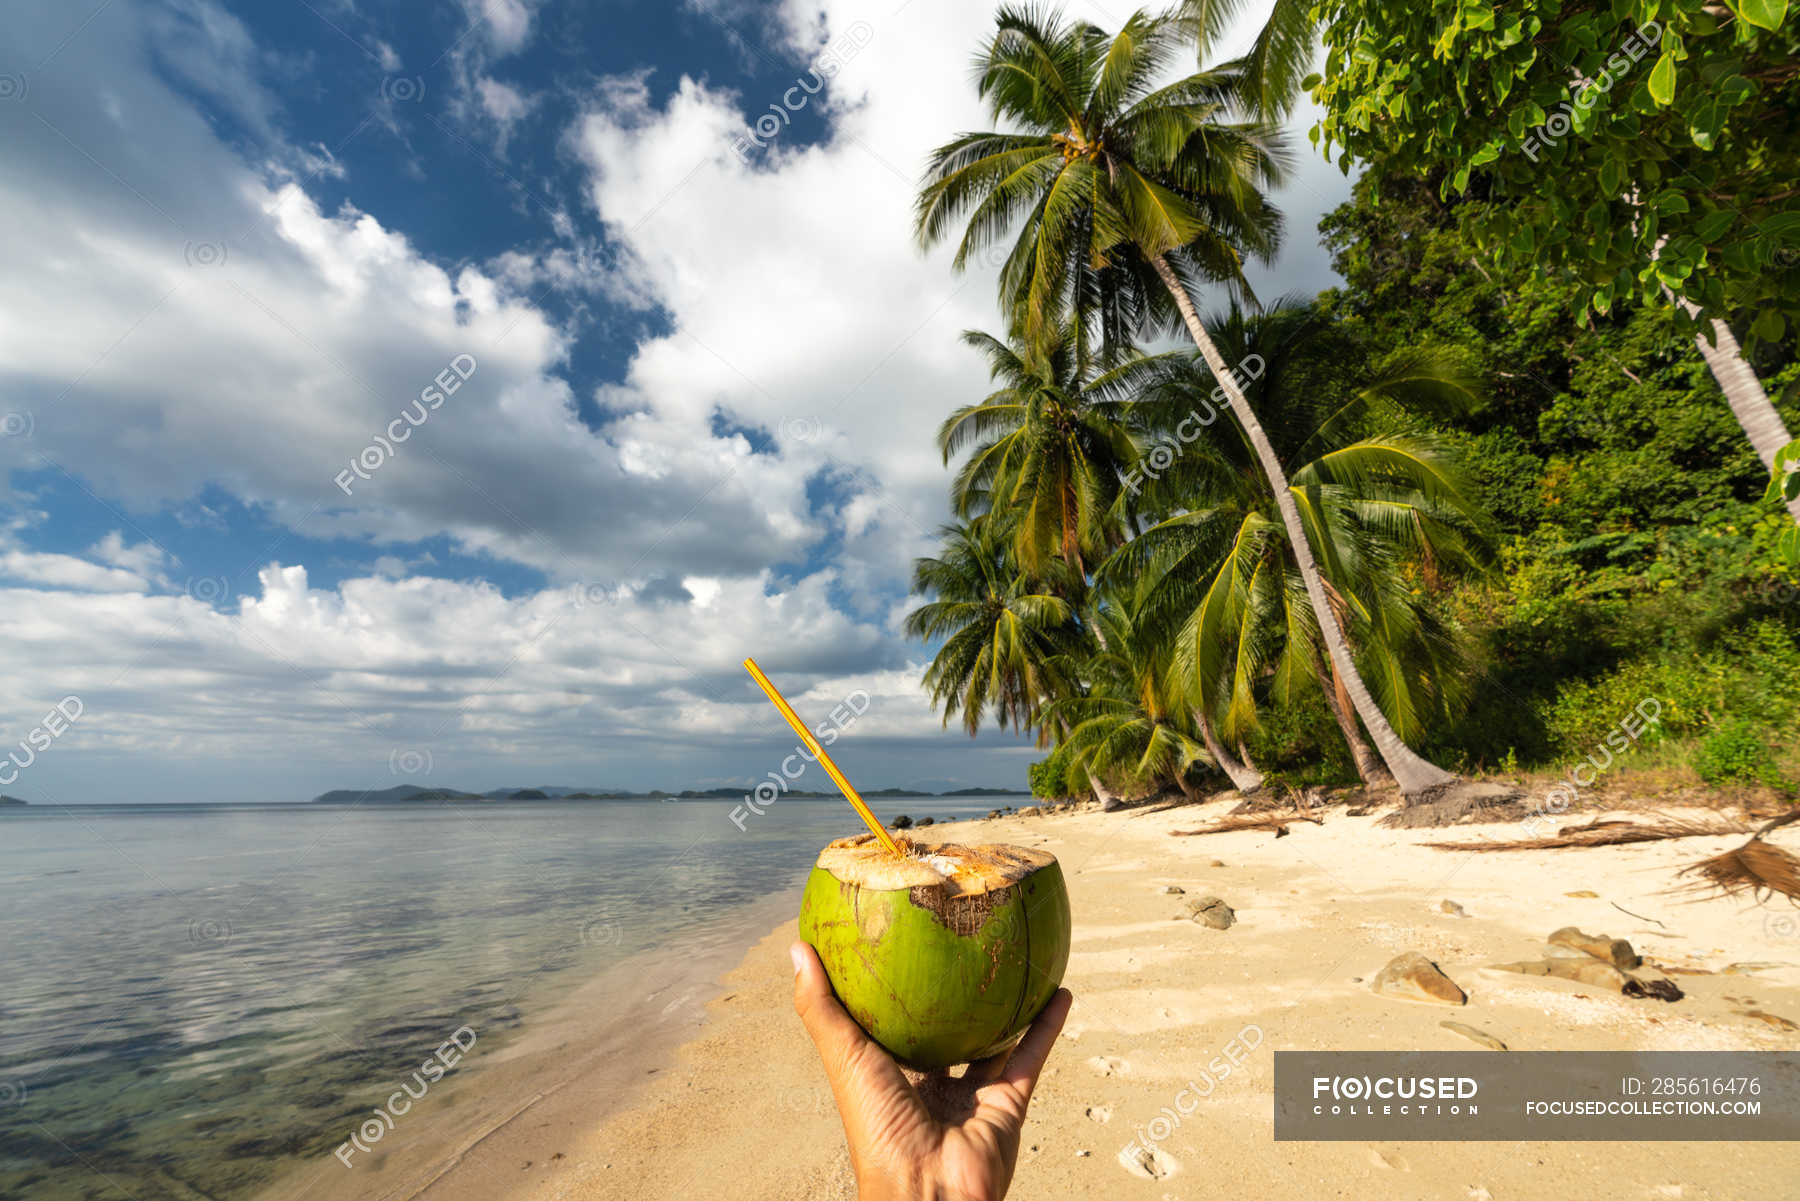 Hand Of Person Holding Coconut Cocktail With Straw On Picturesque Seashore With Palm Trees